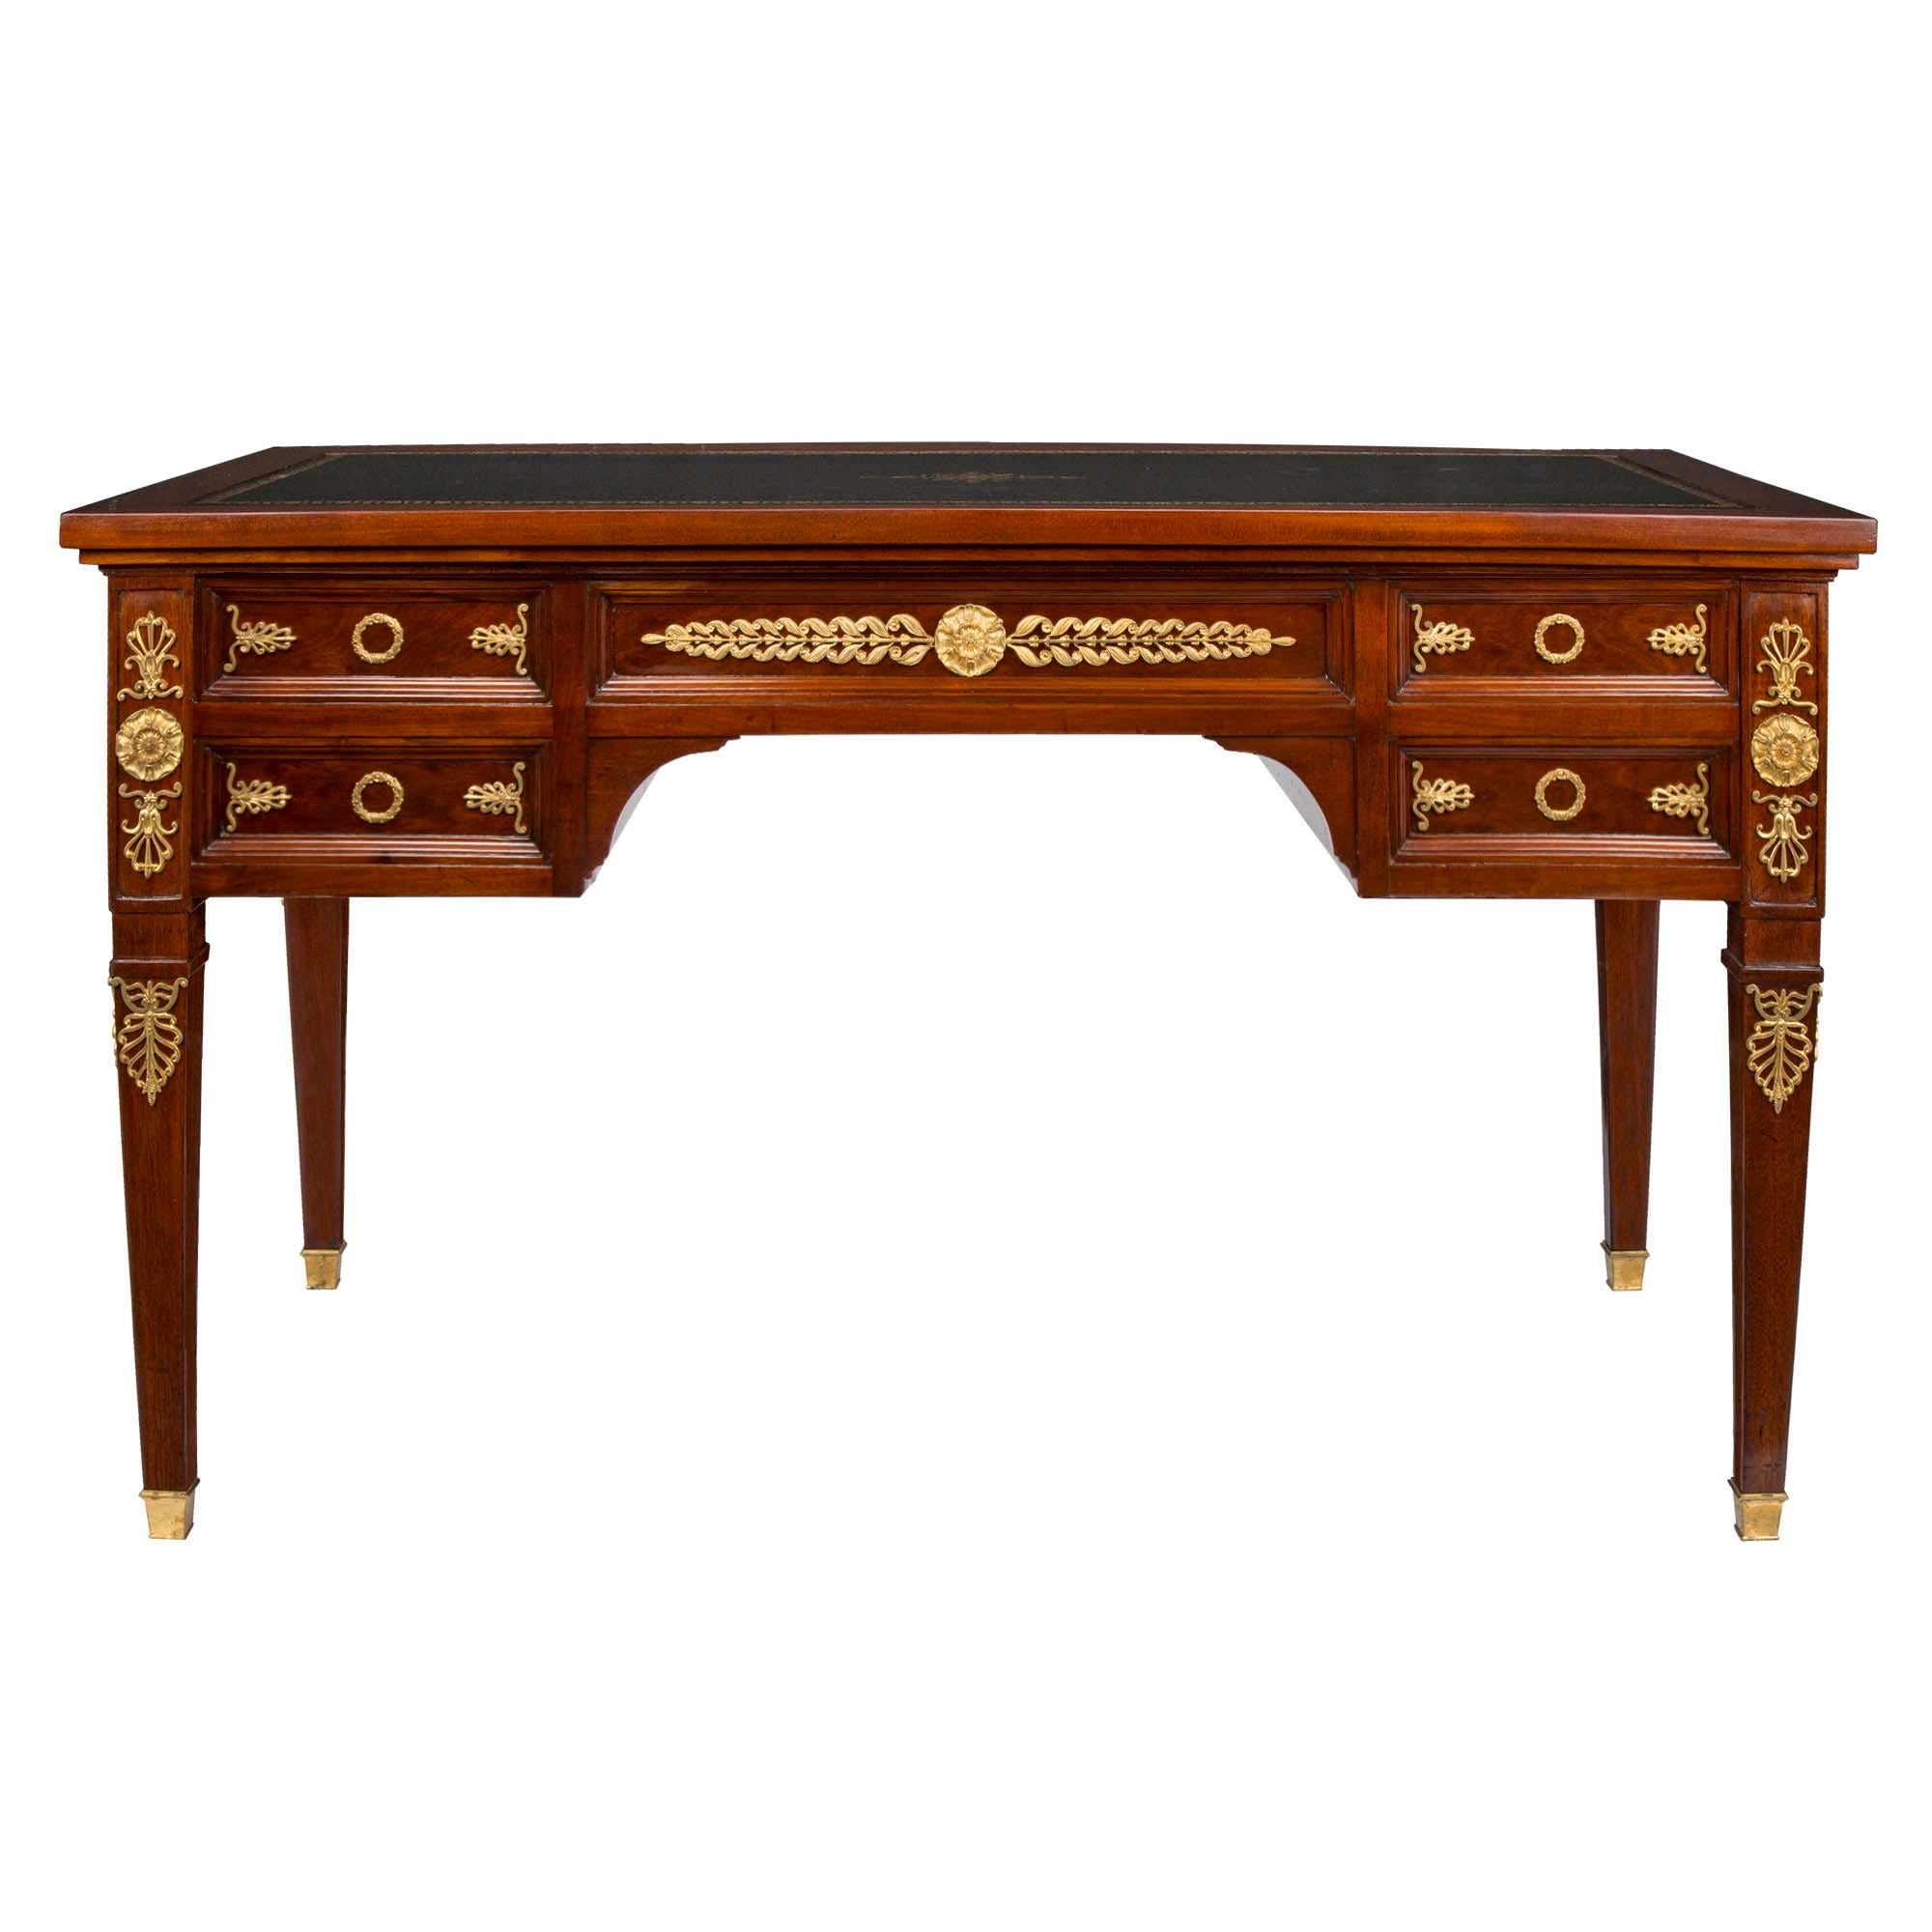 French 19th Century Empire Style Mahogany and Ormolu Bureau Plat For Sale 8